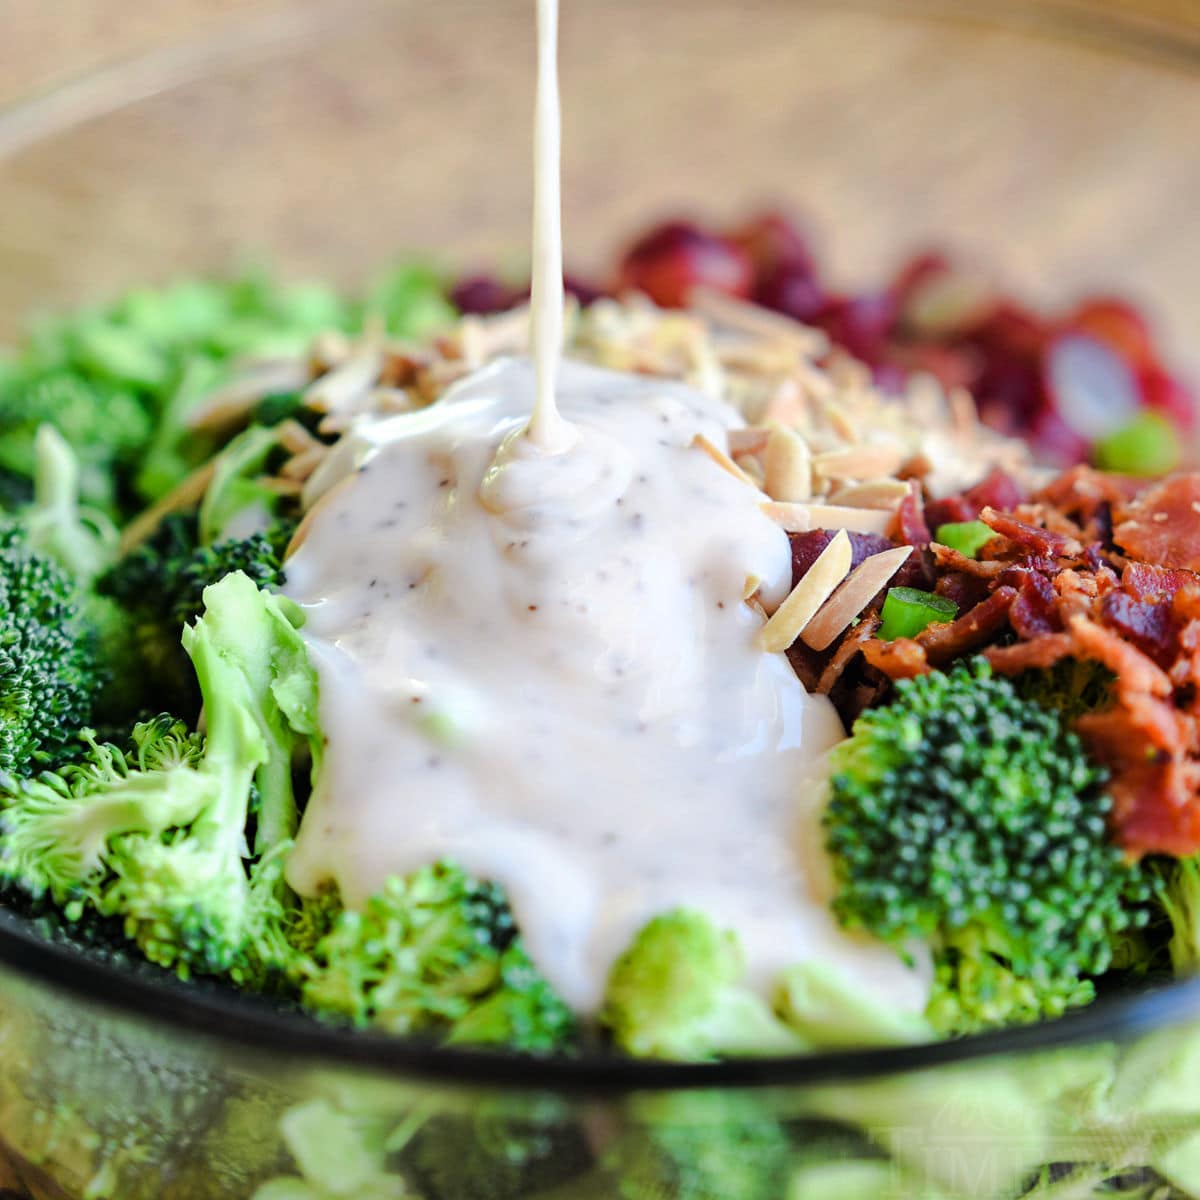 square image showing broccoli salad dressing being drizzled onto the rest of the ingredients in a large glass bowl.